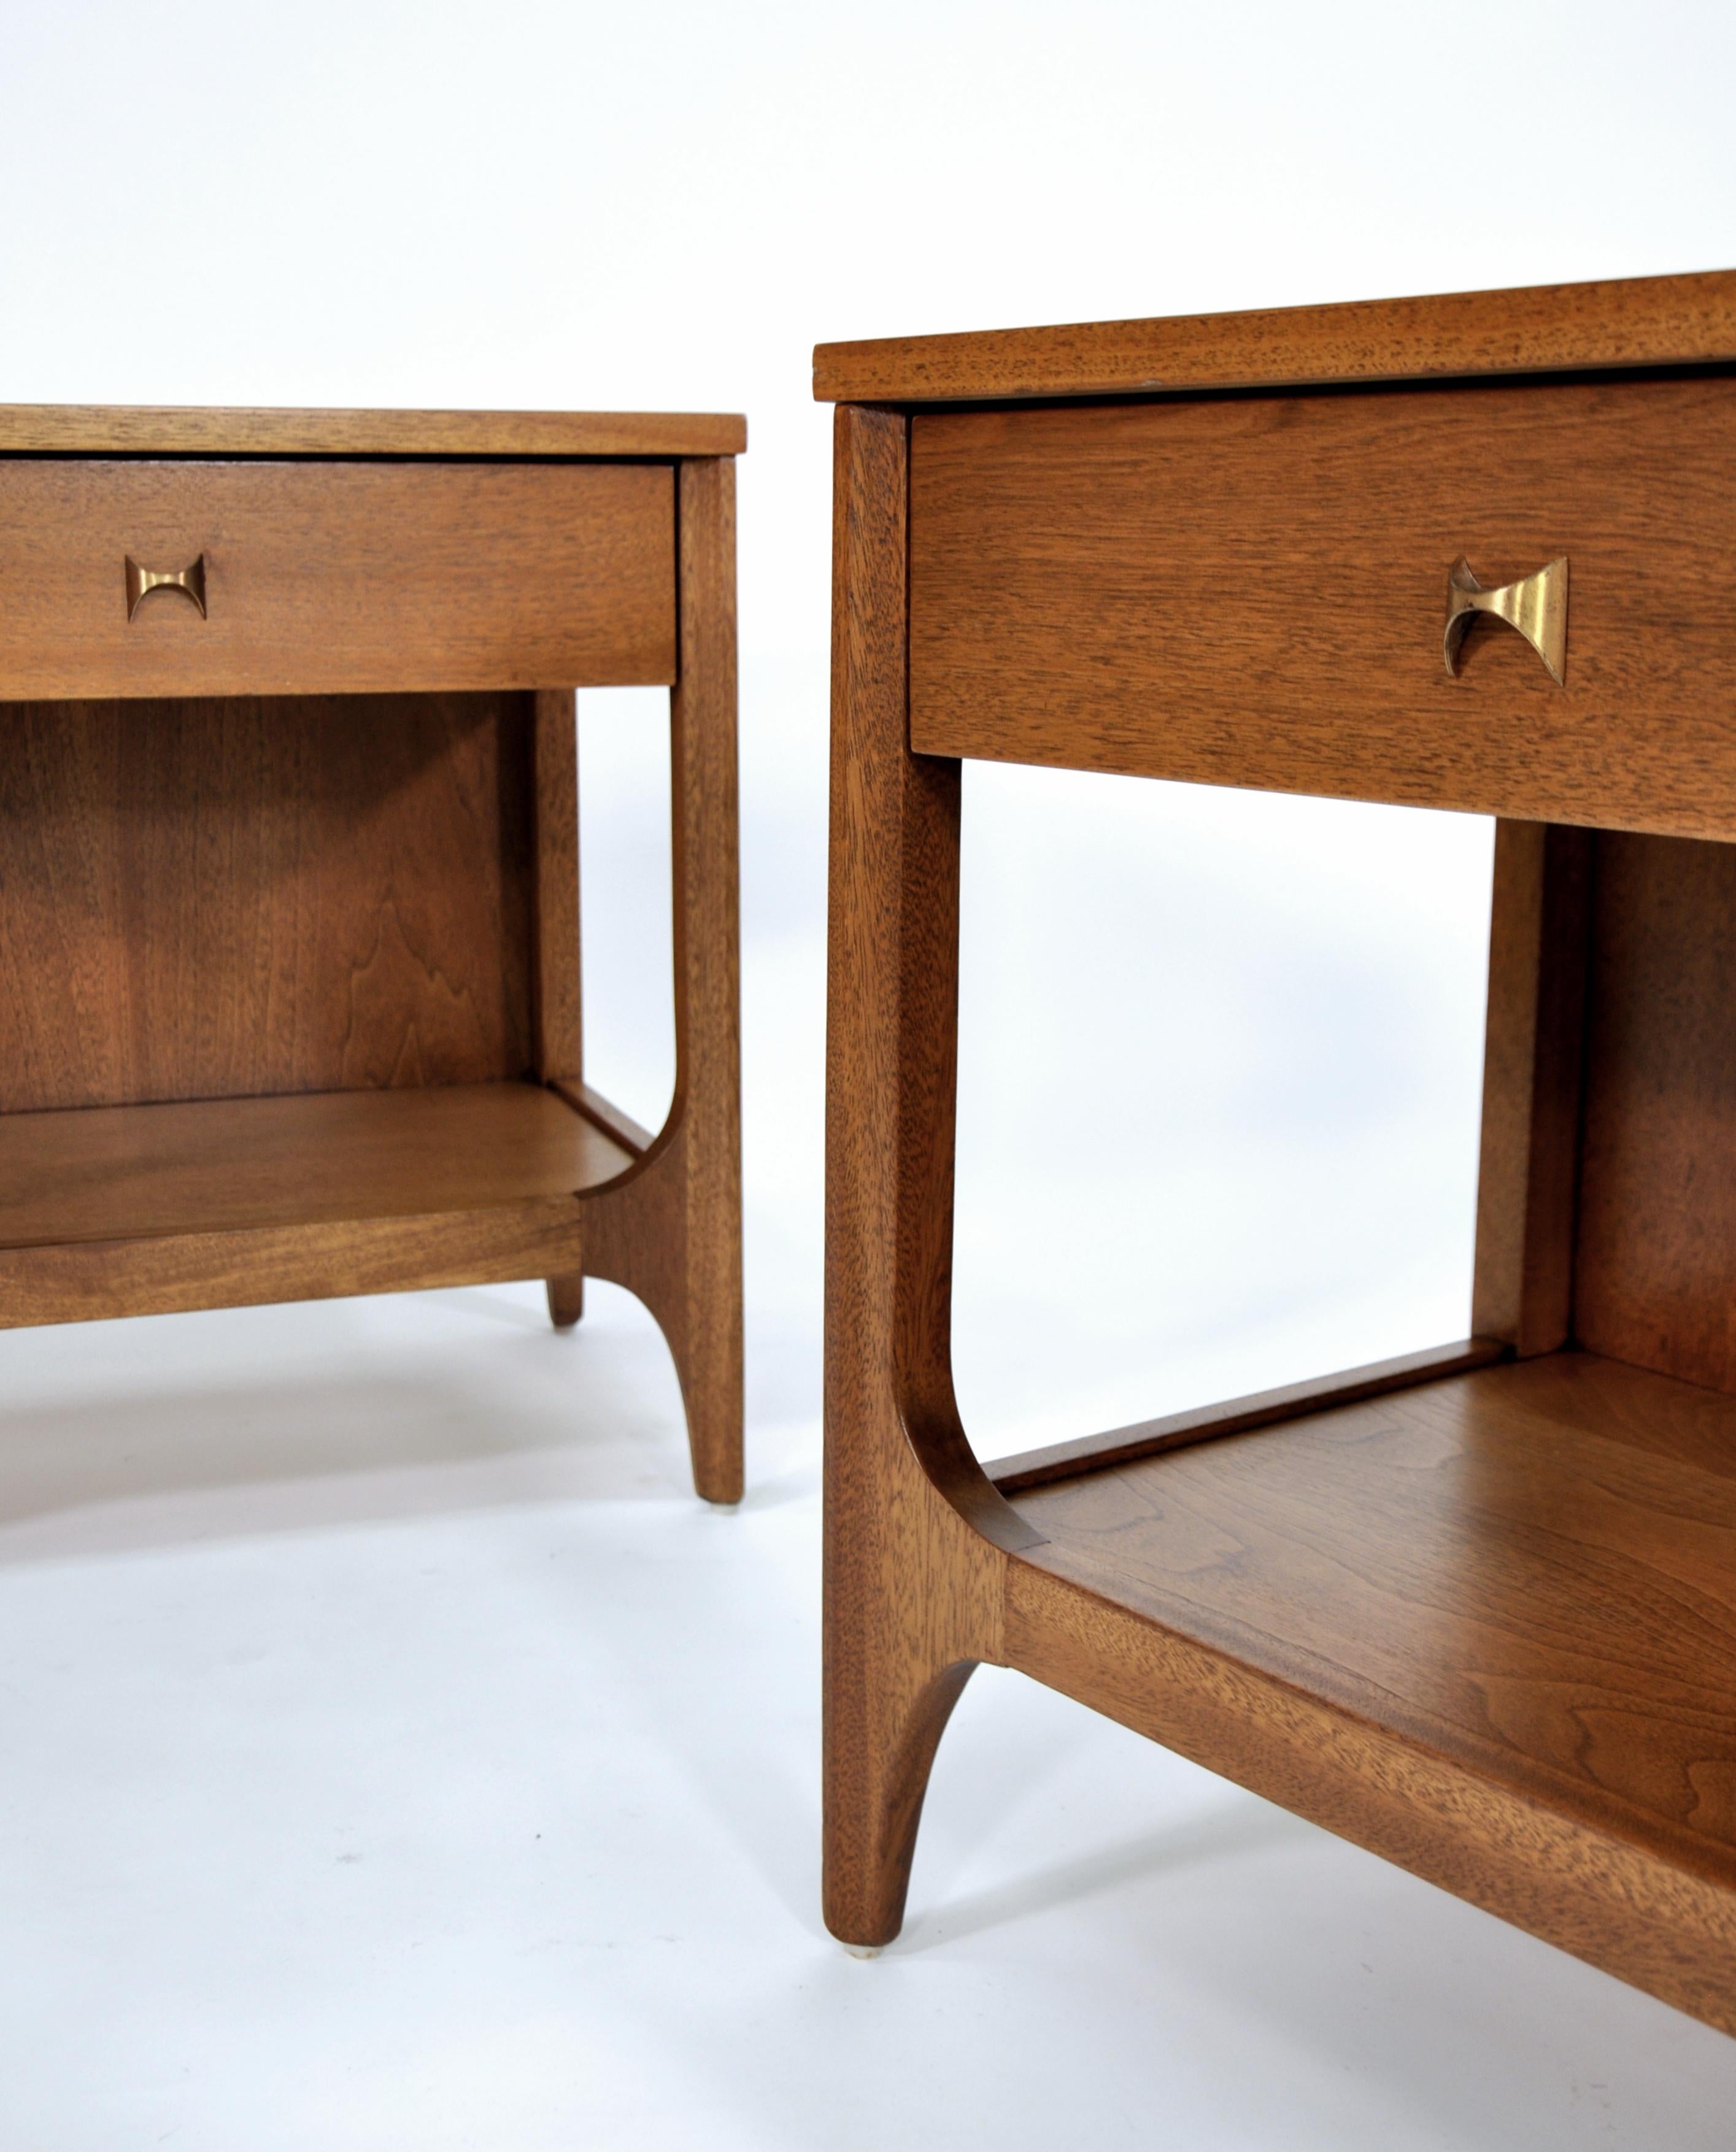 Pair of vintage Mid-Century Modern walnut and brass end or bedside tables from the Brasilia II line manufactured by Broyhill in the 1960s. Each two-tiered occasional table is fitted with a drawer and a shelf. The drawer fronts of the nightstands